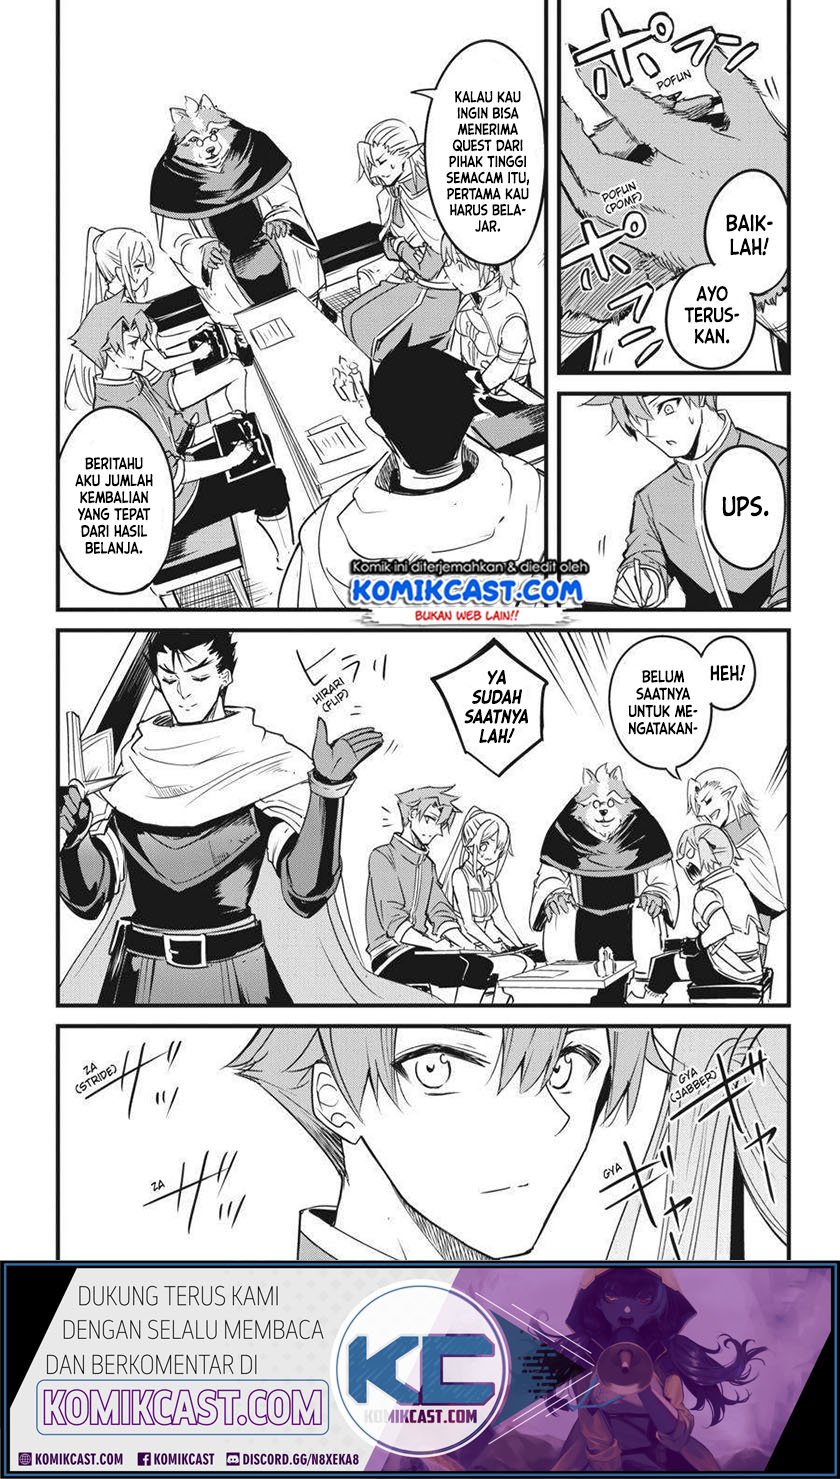 Goblin Slayer Side Story: Year One Chapter 47